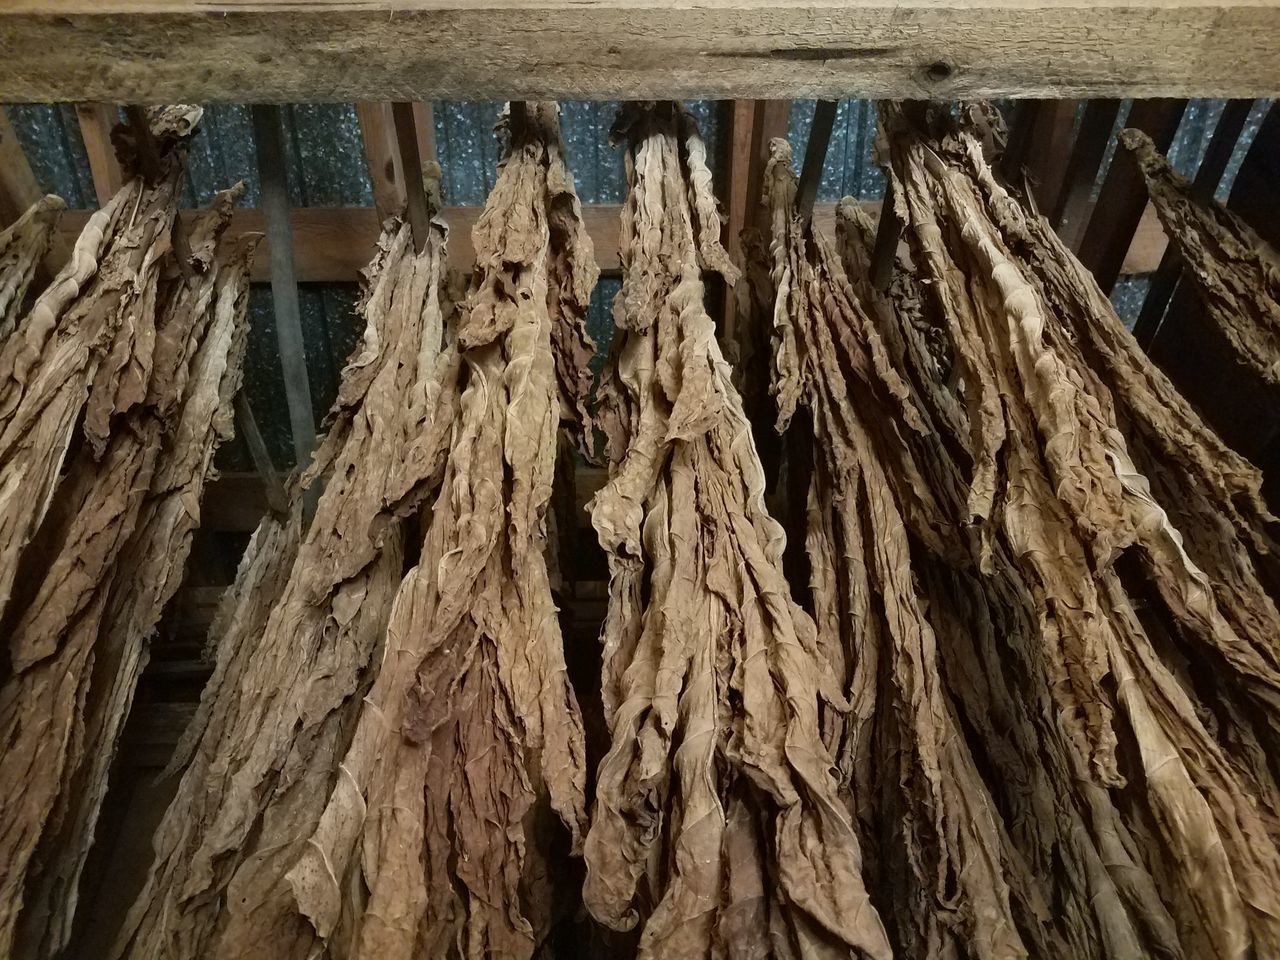 LOW ANGLE VIEW OF WOODEN HANGING ROOF